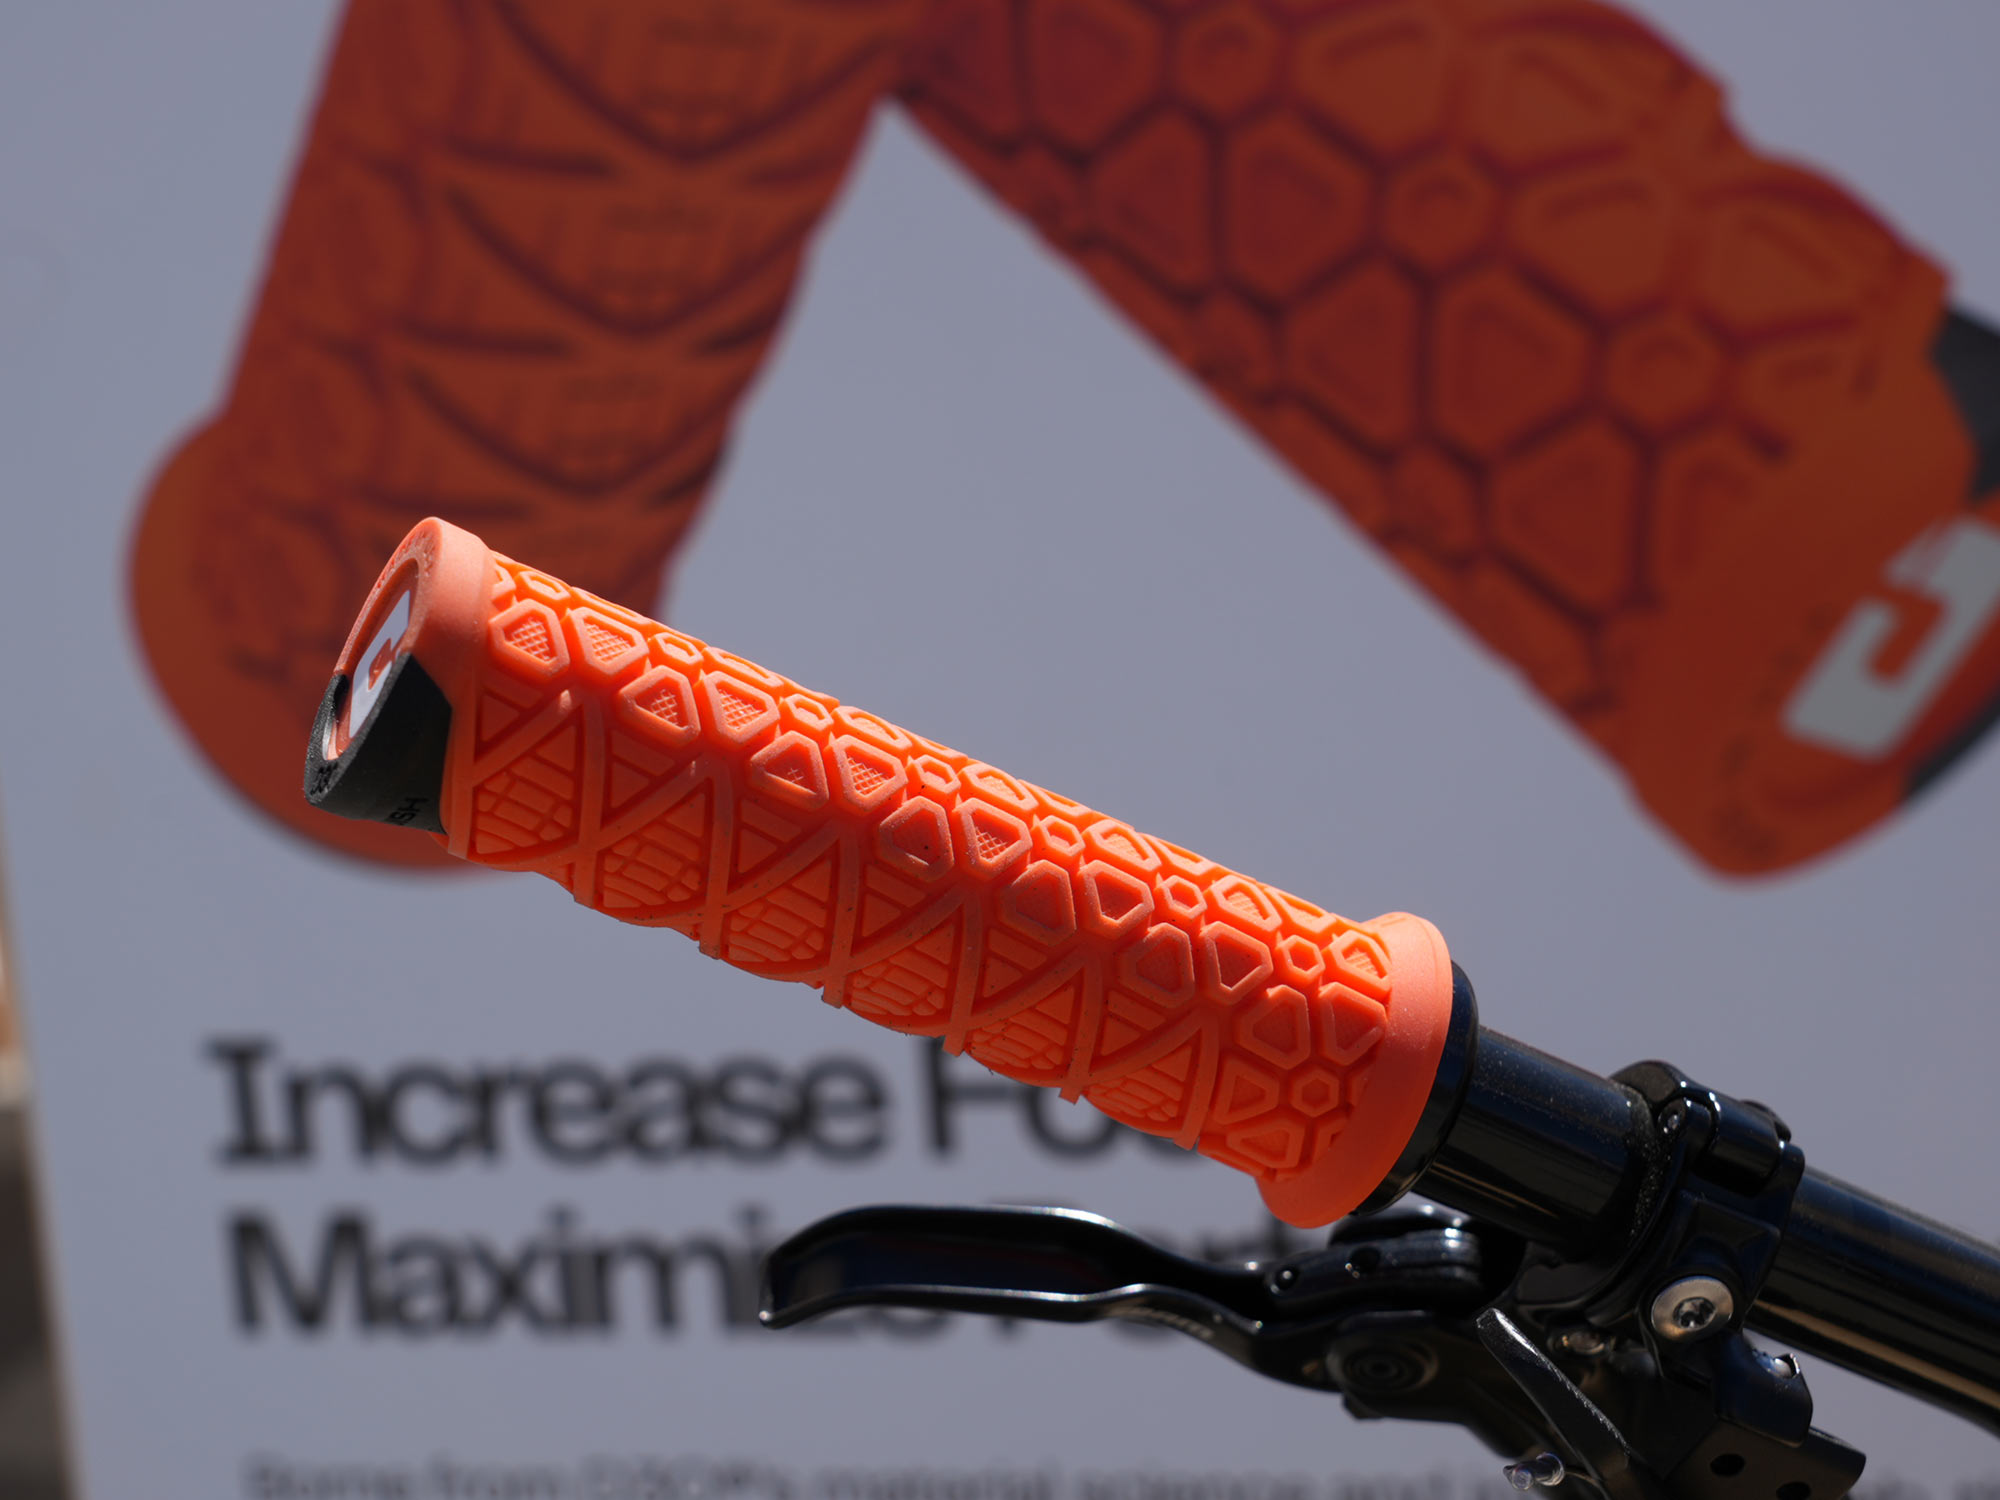 New Vibration Damping MTB Grips from Wolf Tooth & ODI x D3O